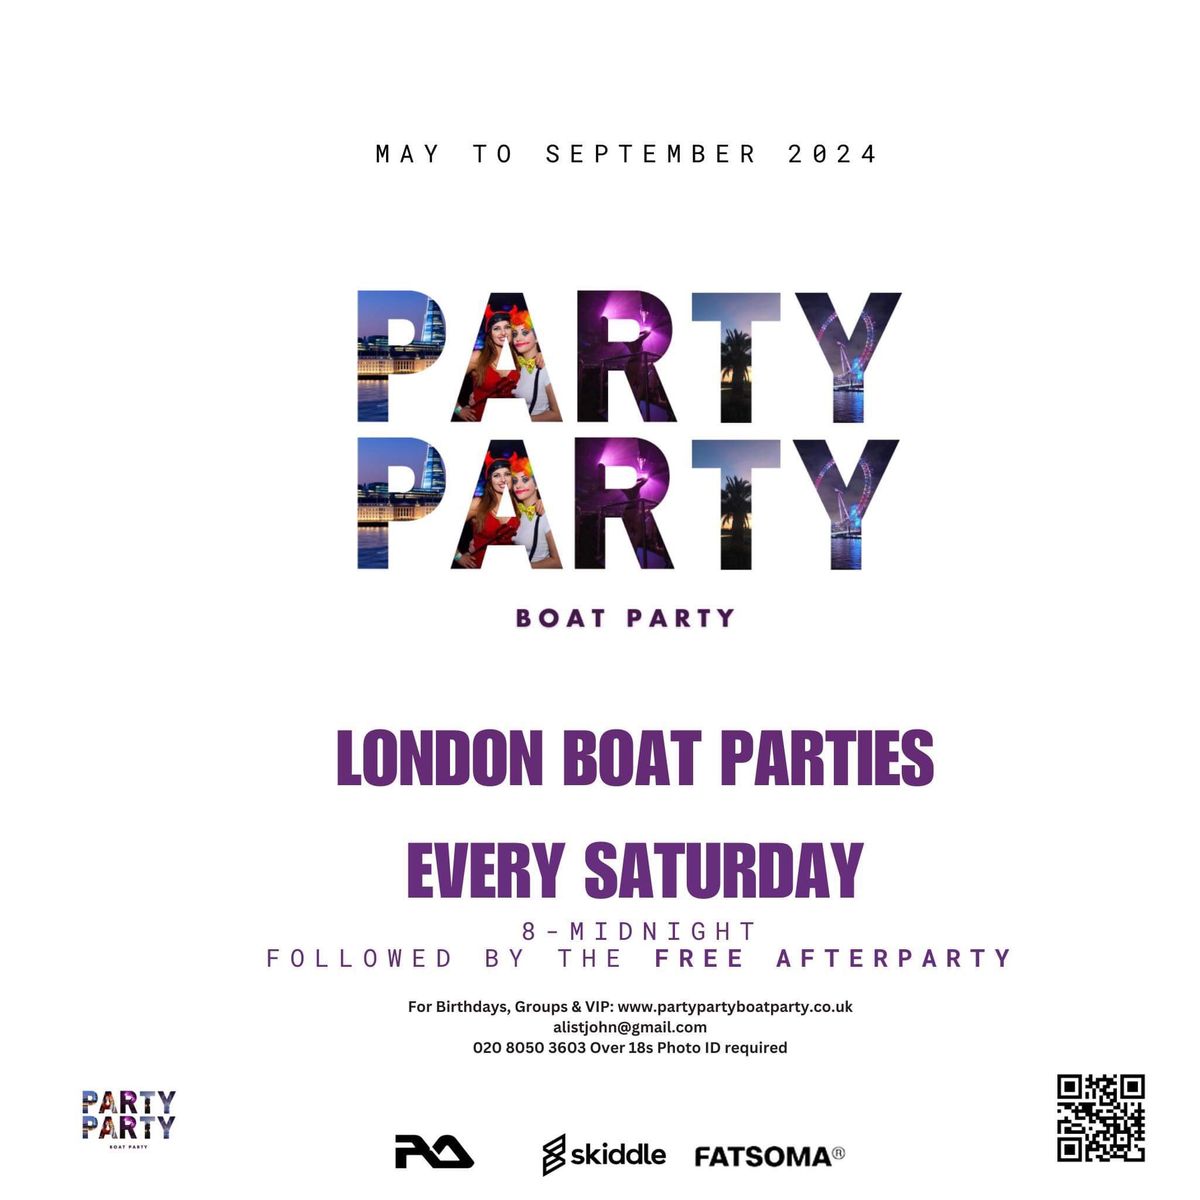 Party Party Boat party every Saturday 